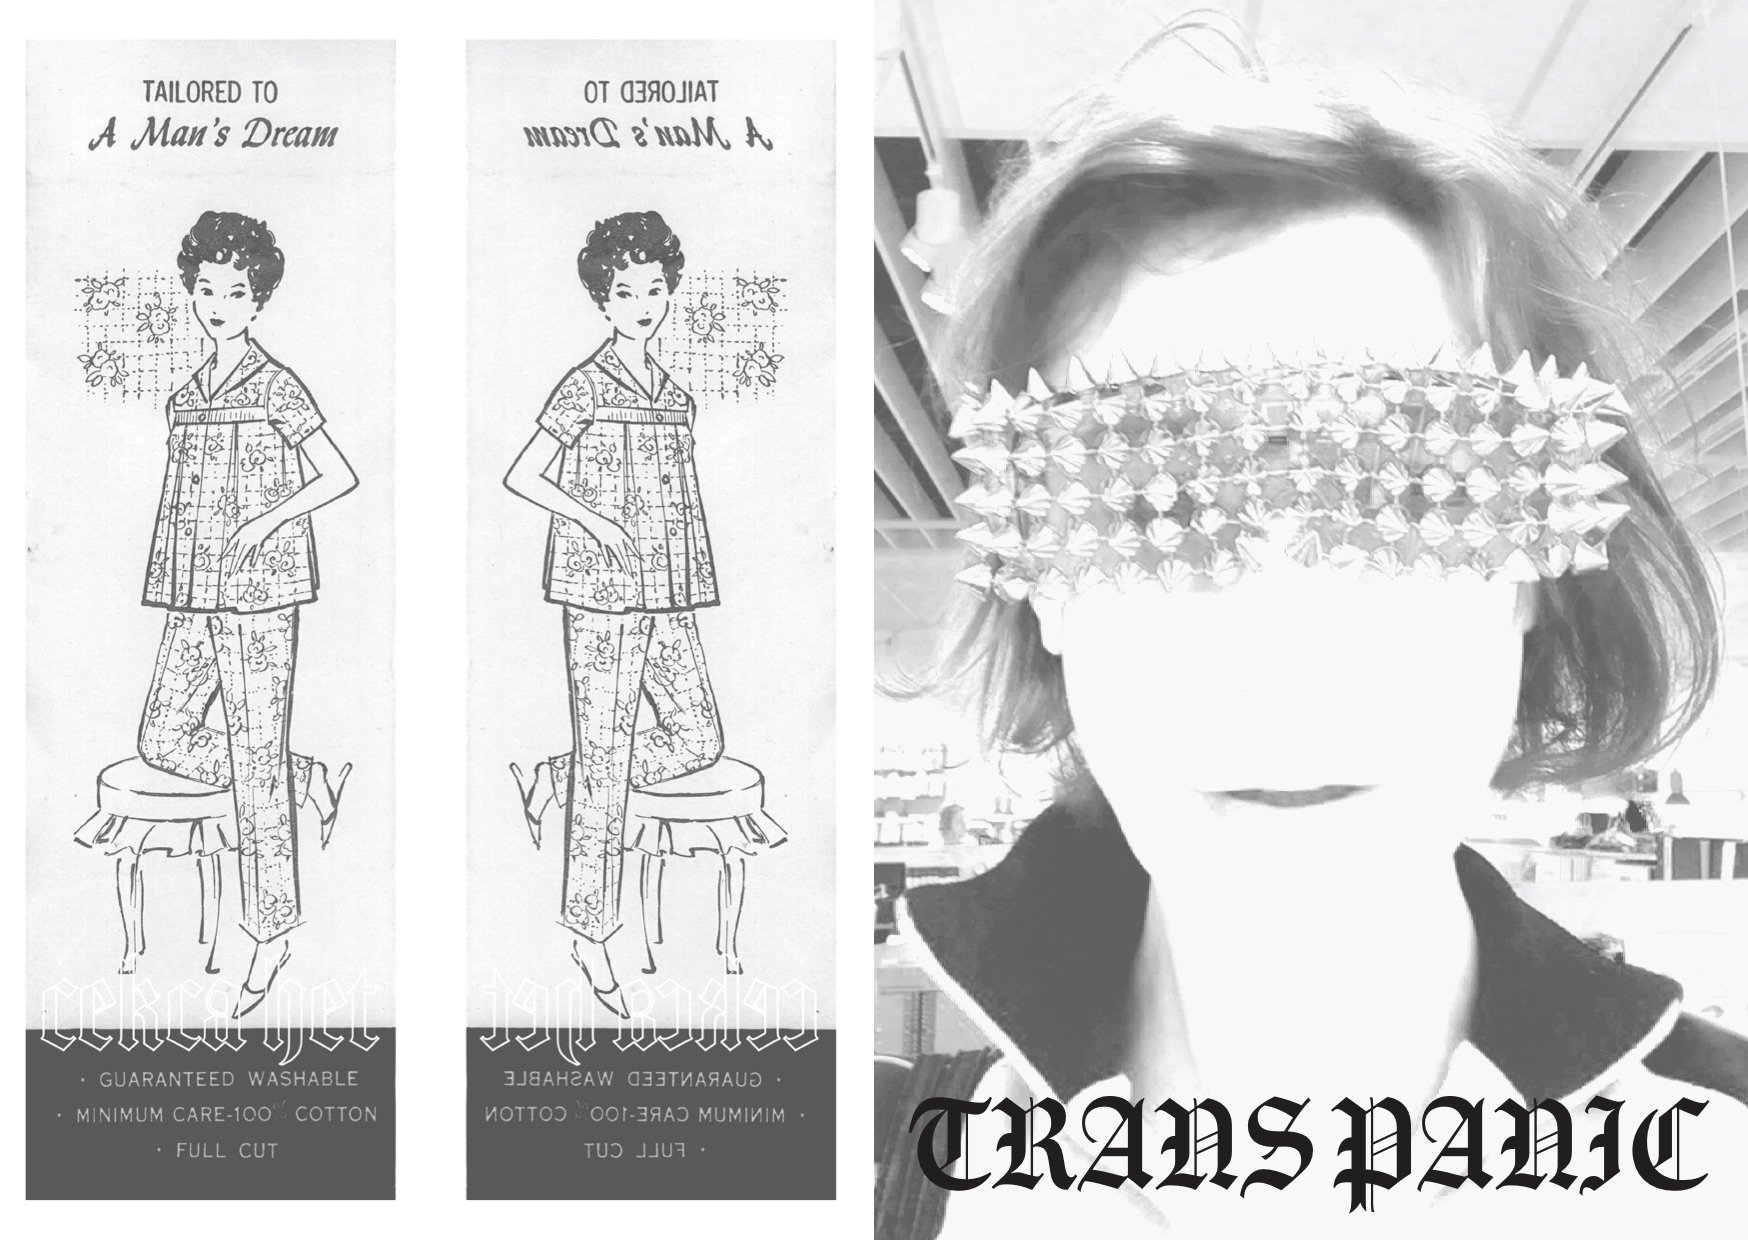 Trans panic zine cover promo print, includes two black and white vintage clothing images of ladies wearing pyjamas, and an image of artist wearing studded glasses